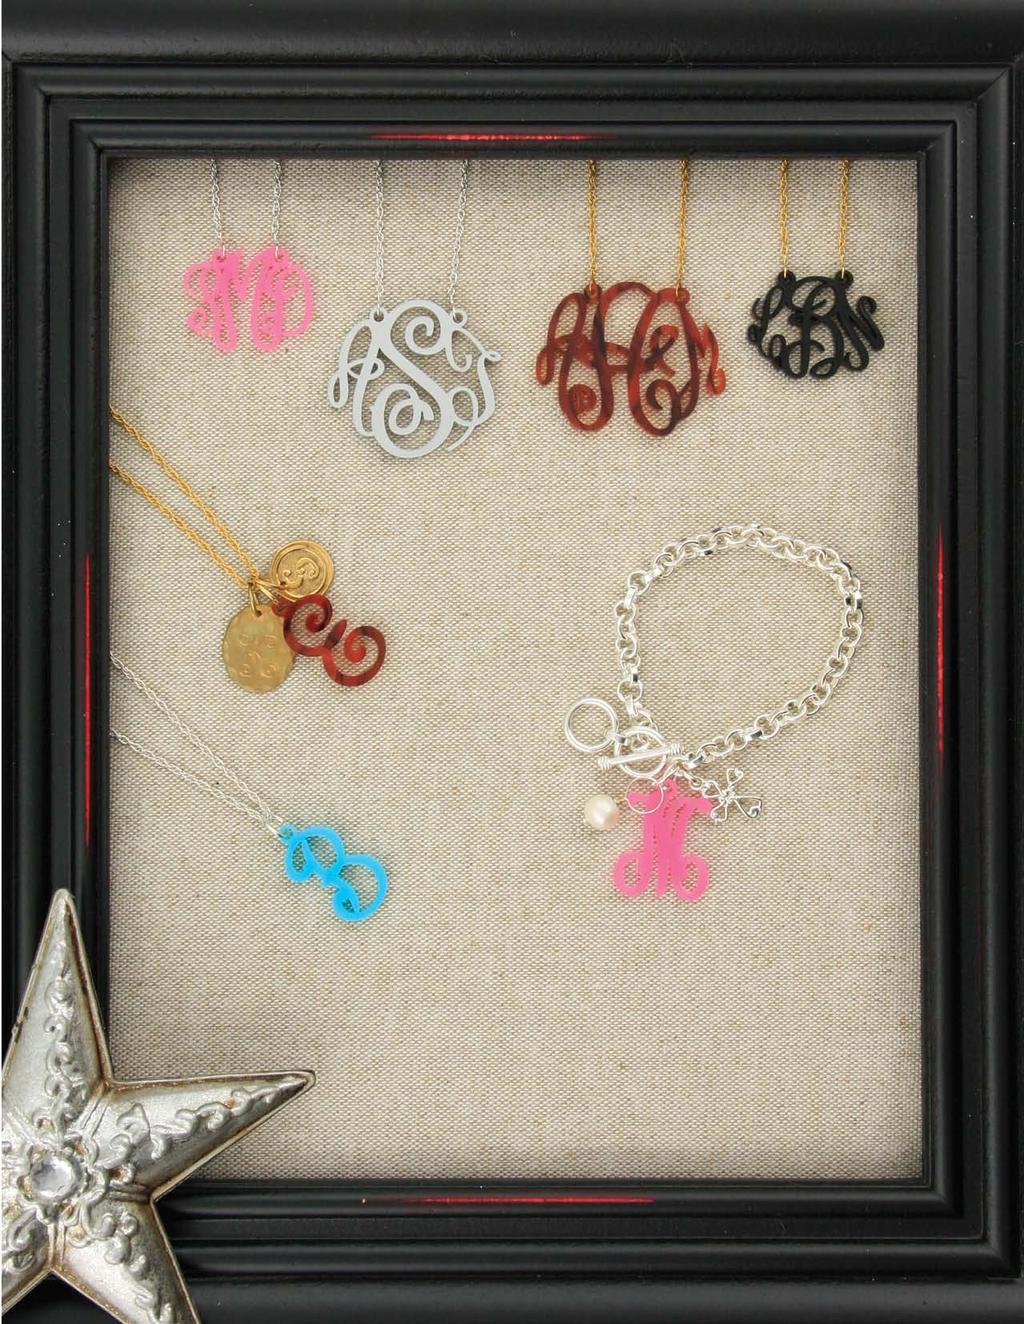 c. d. d. c. e. Acrylic Filigree Monograms Add charms to create a unique initial necklace! JB0216 $24 7 1/2-8 JC0007 $7 JC0054 $12 e. e. Remove the single initial from the chain and place on a bracelet.